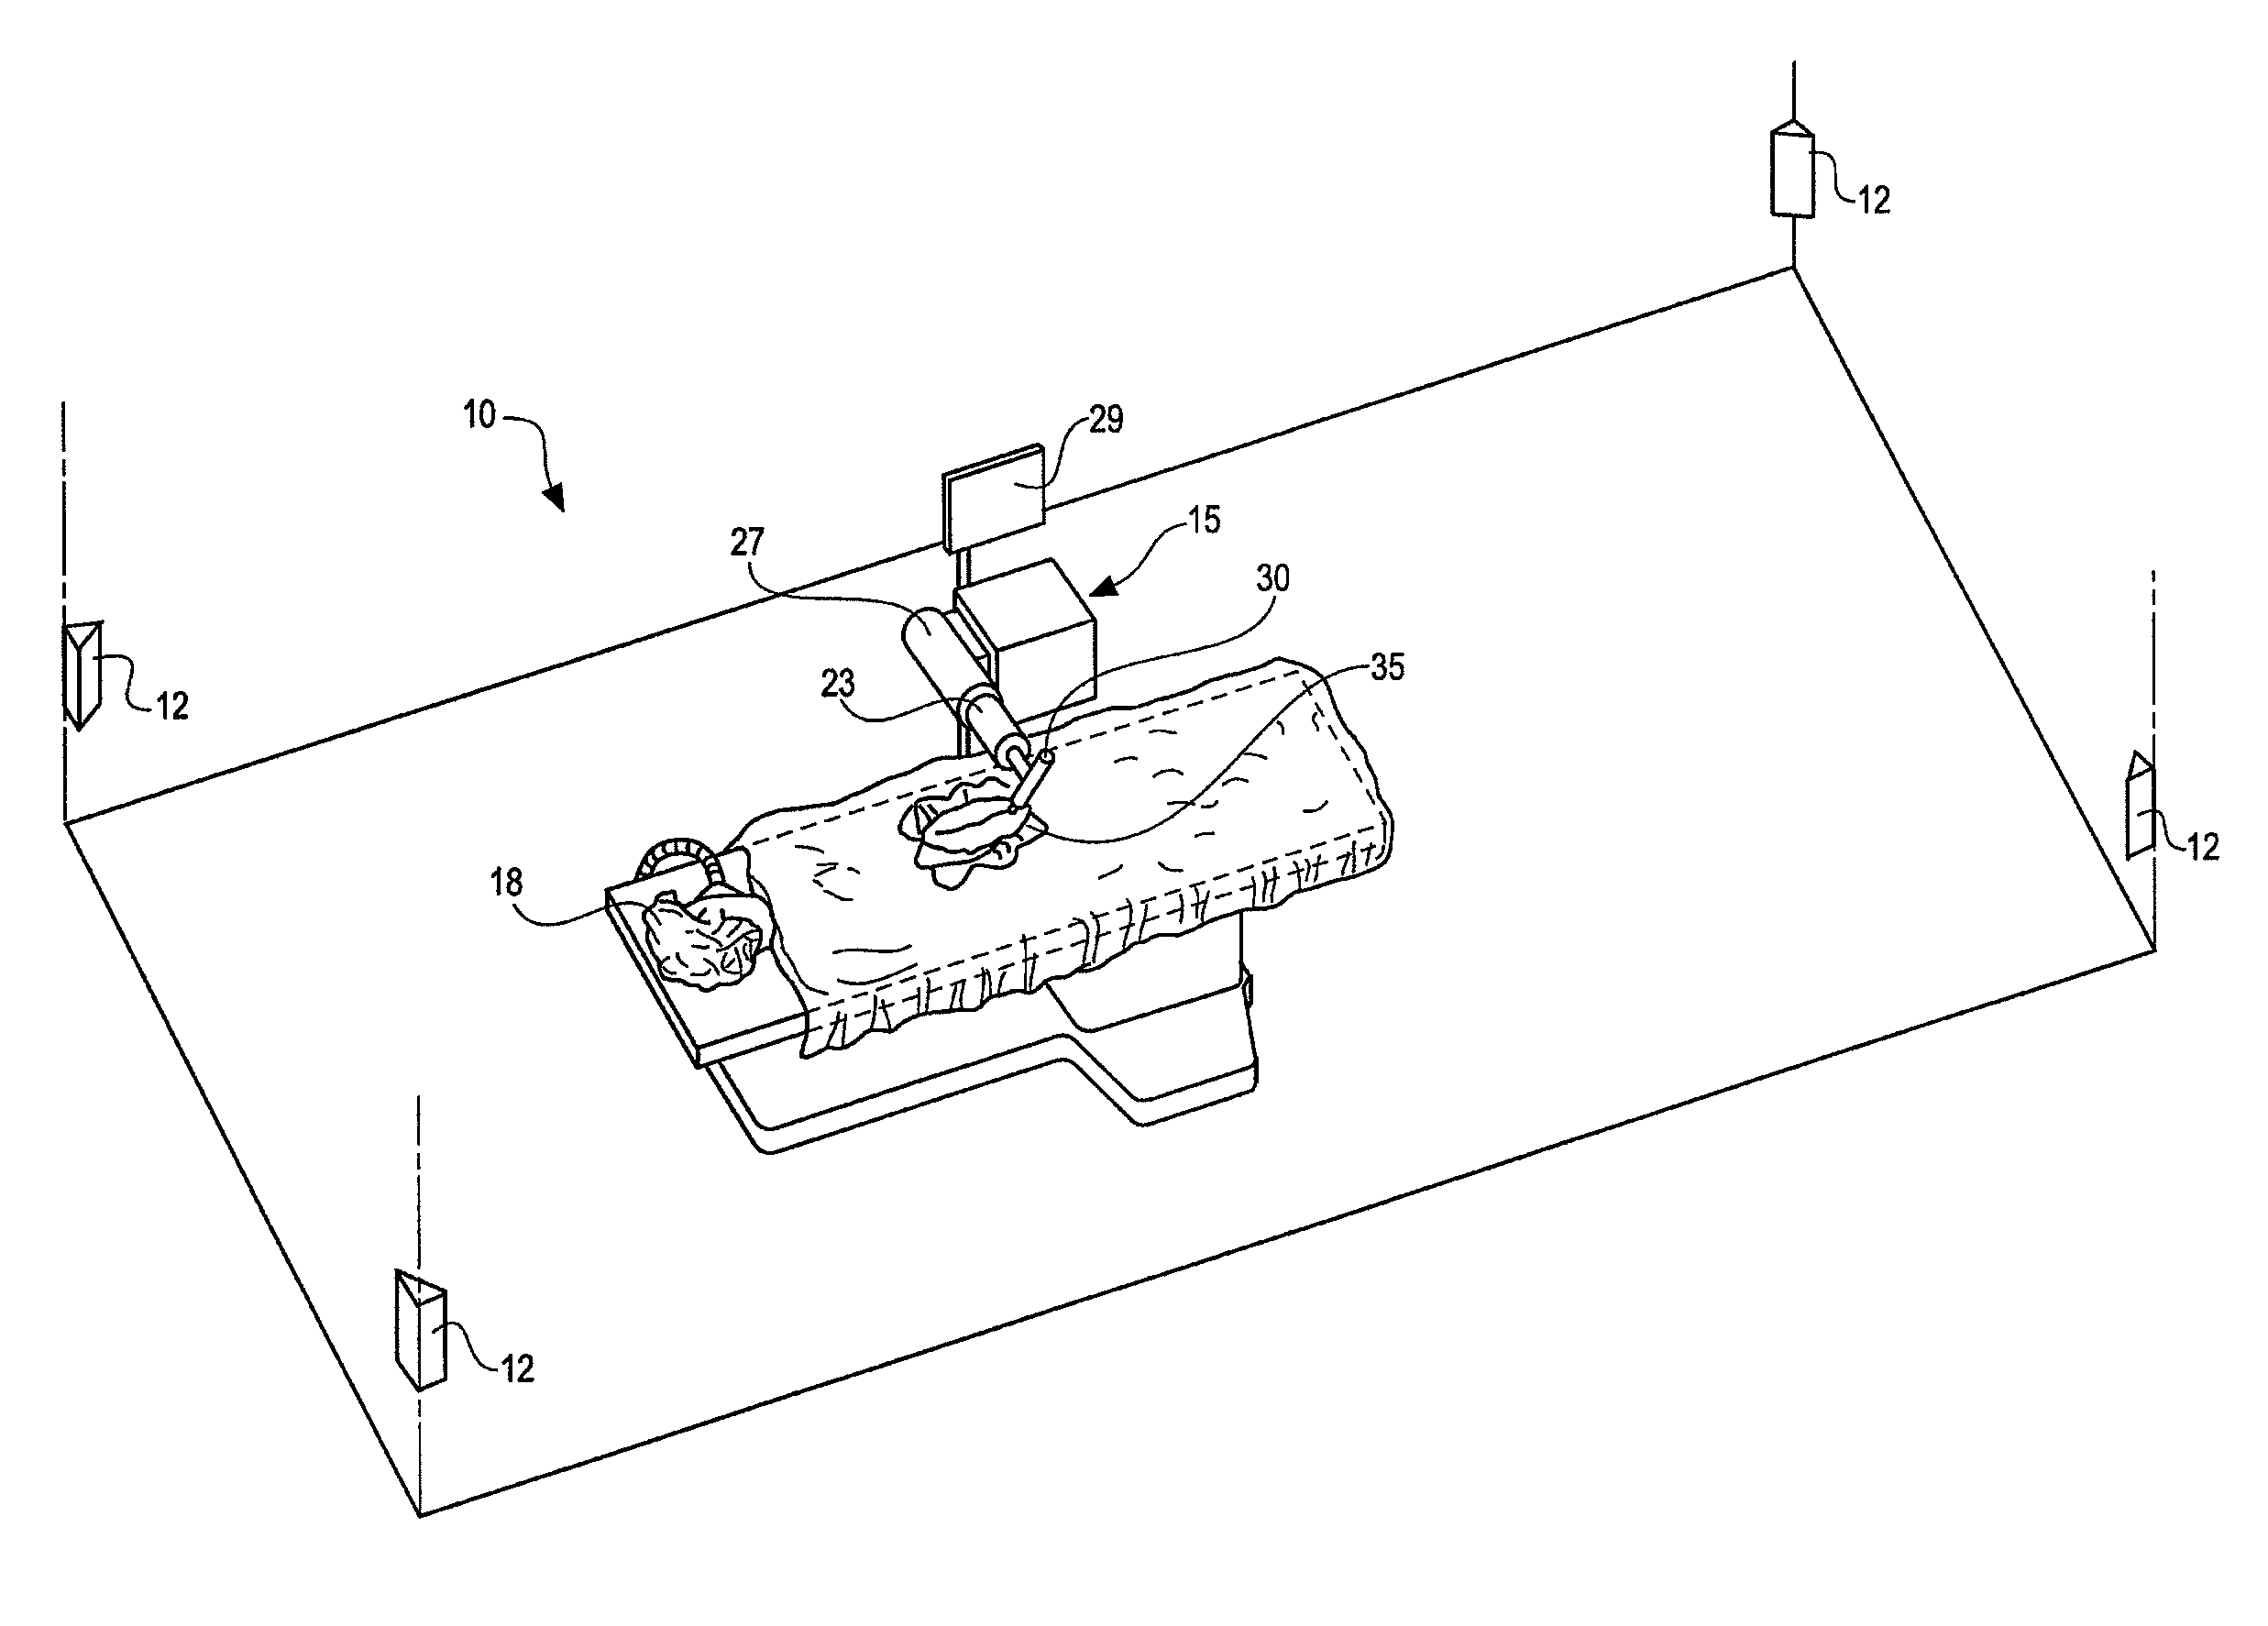 Method and system for performing invasive medical procedures using a surgical robot